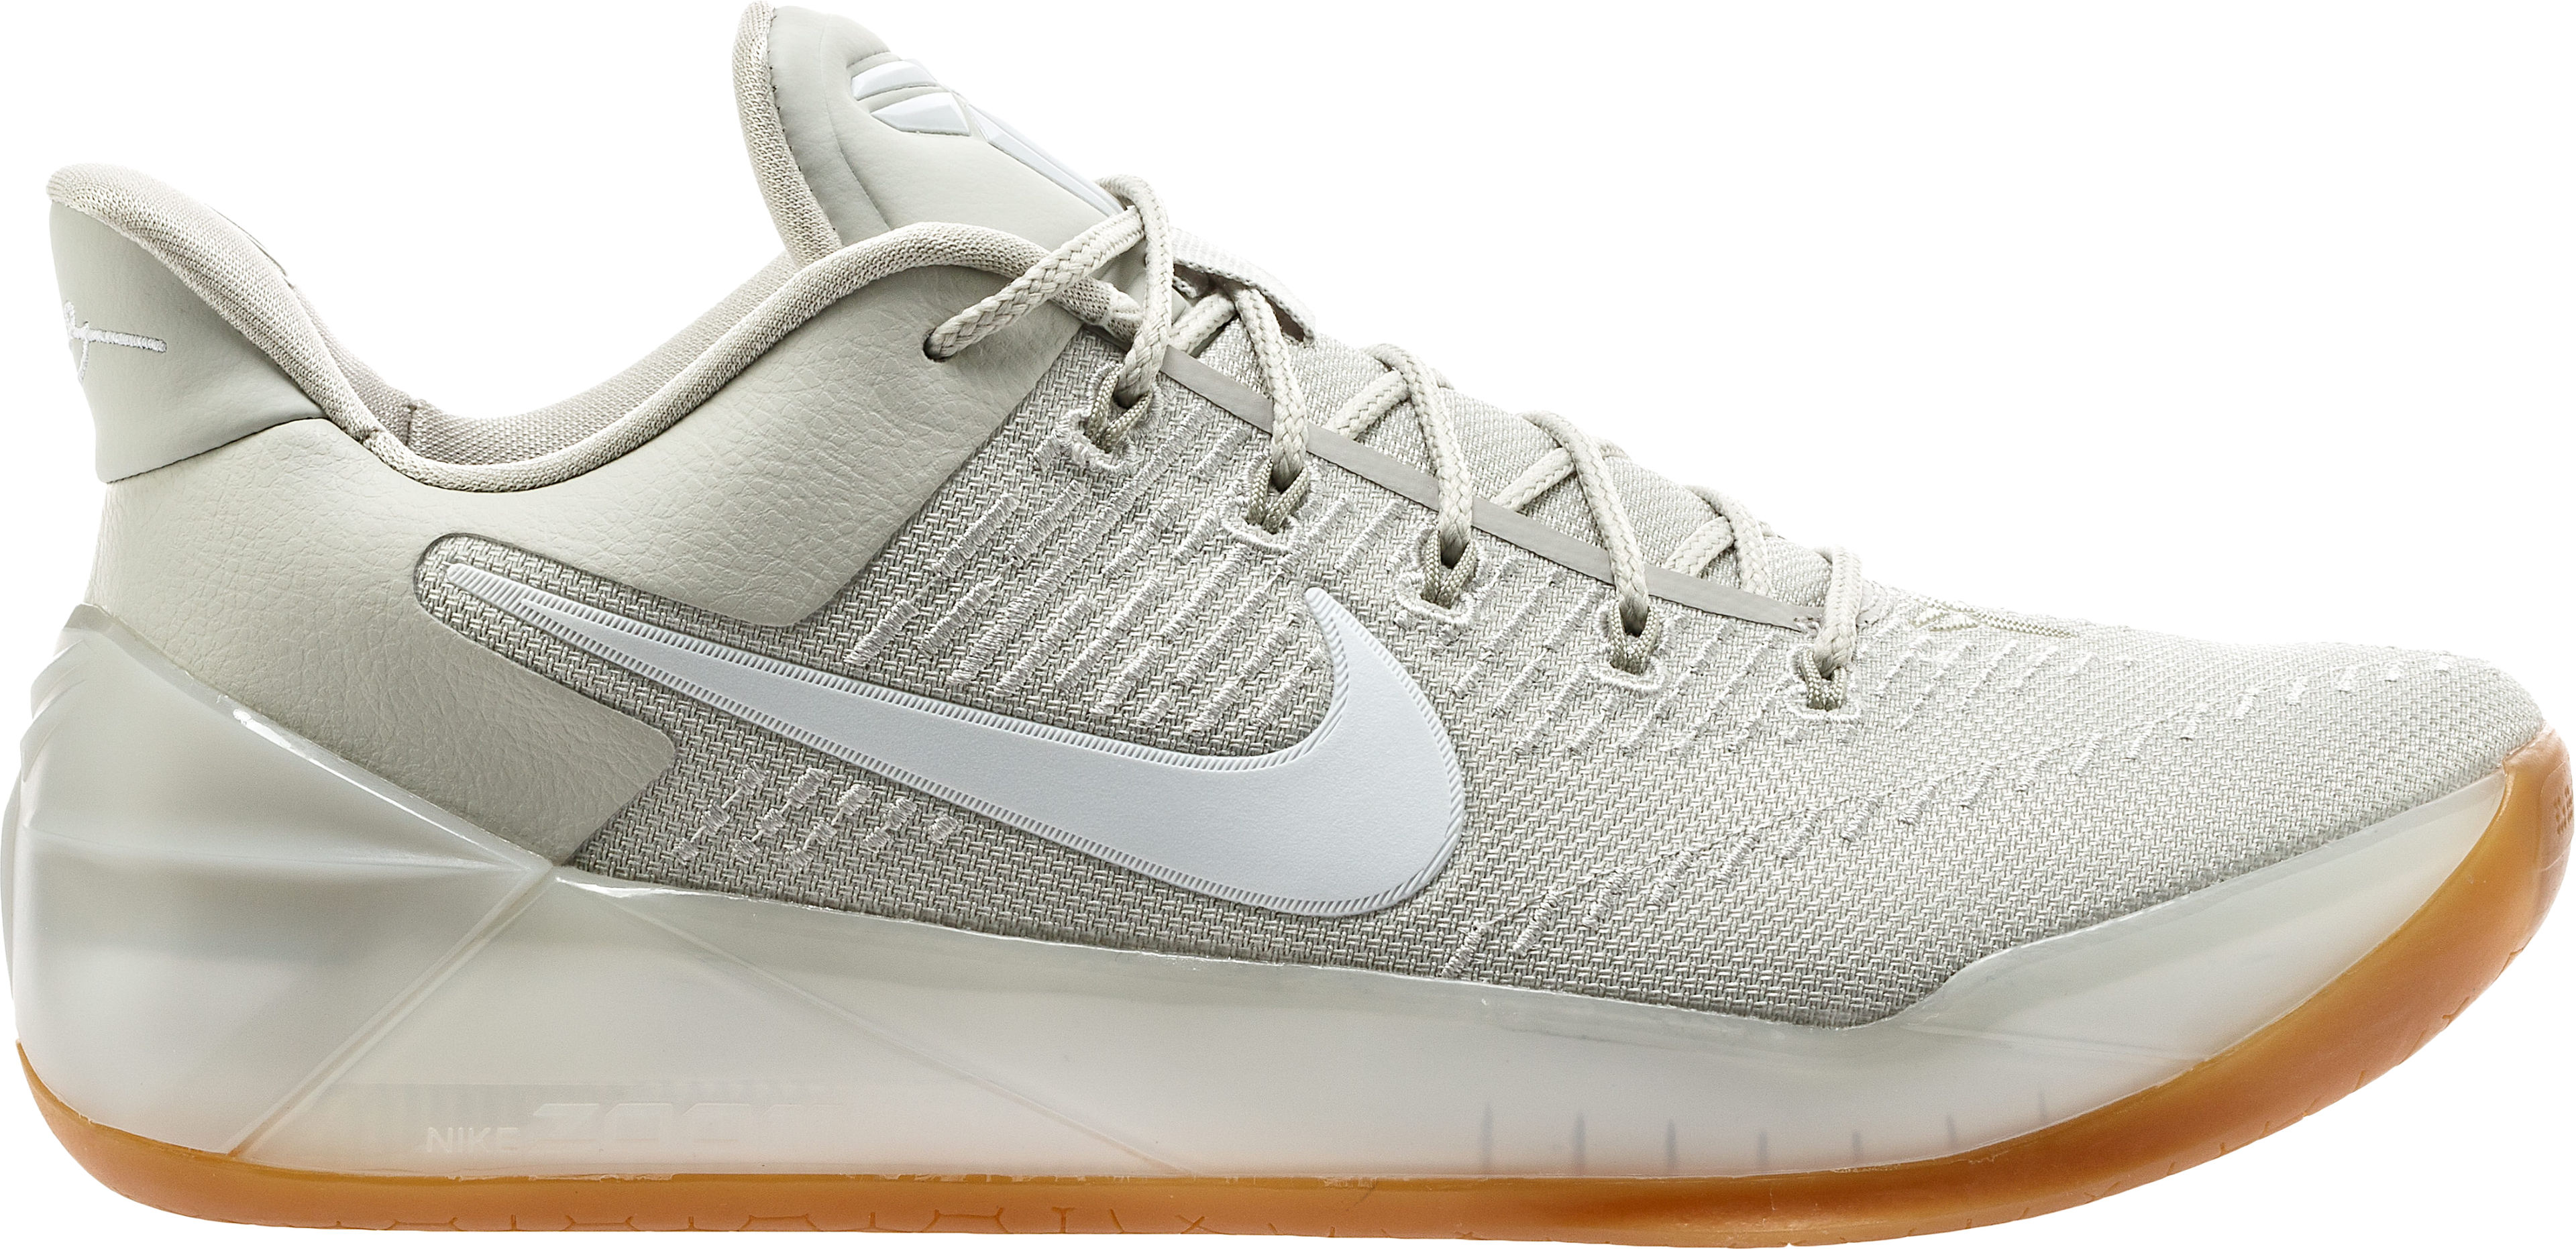 Nike Keeps It Simple on the Next Kobe A.D. | Complex